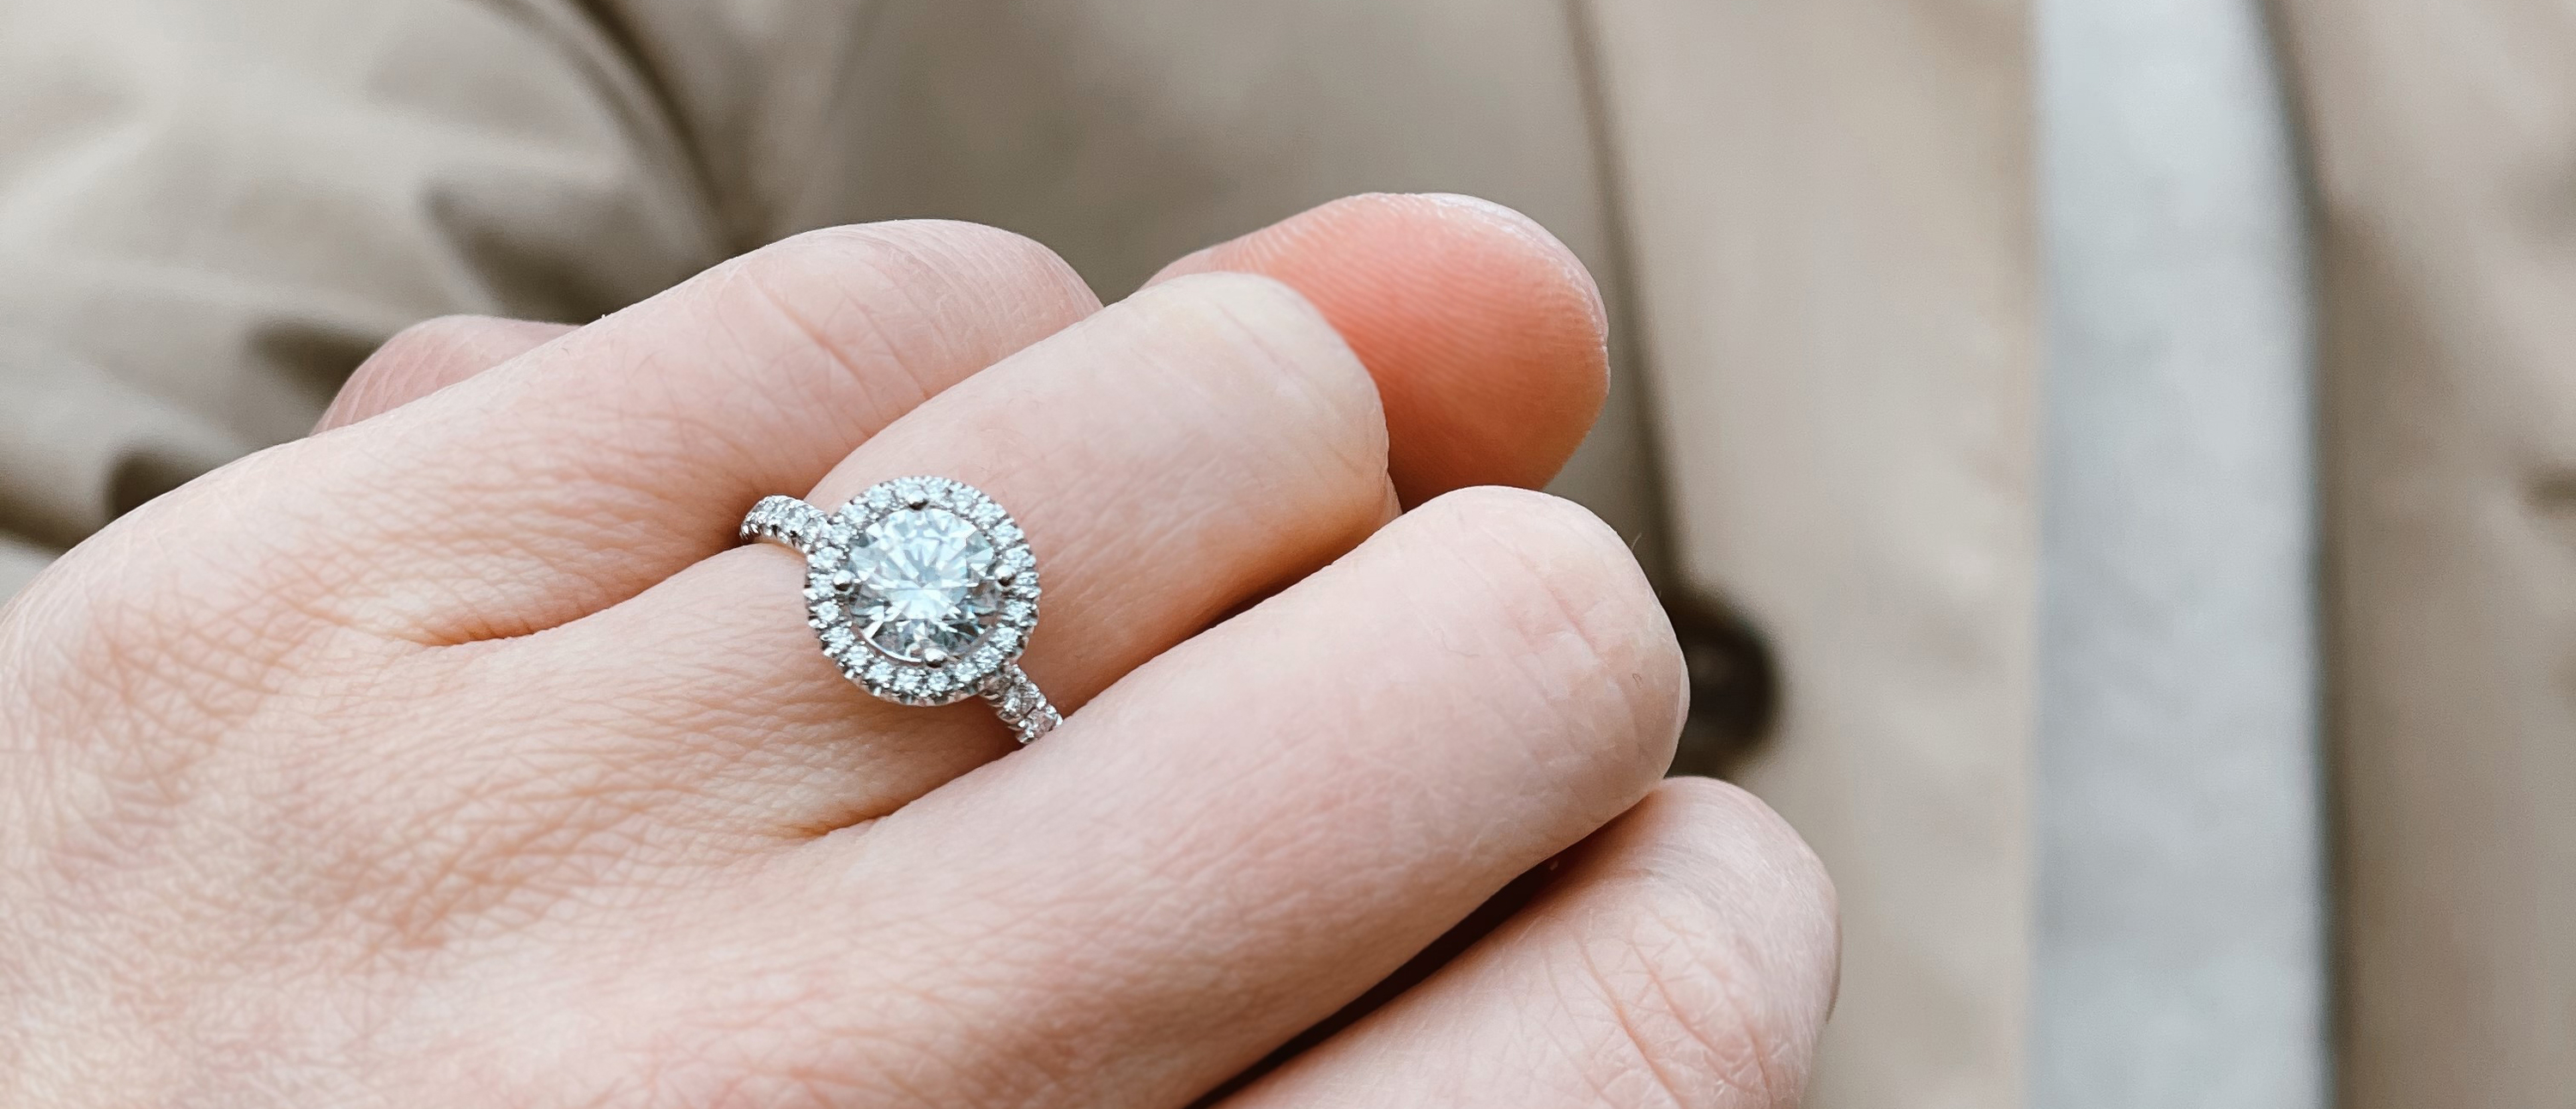 5 Tips For A Perfect Engagement Ring - BAUNAT